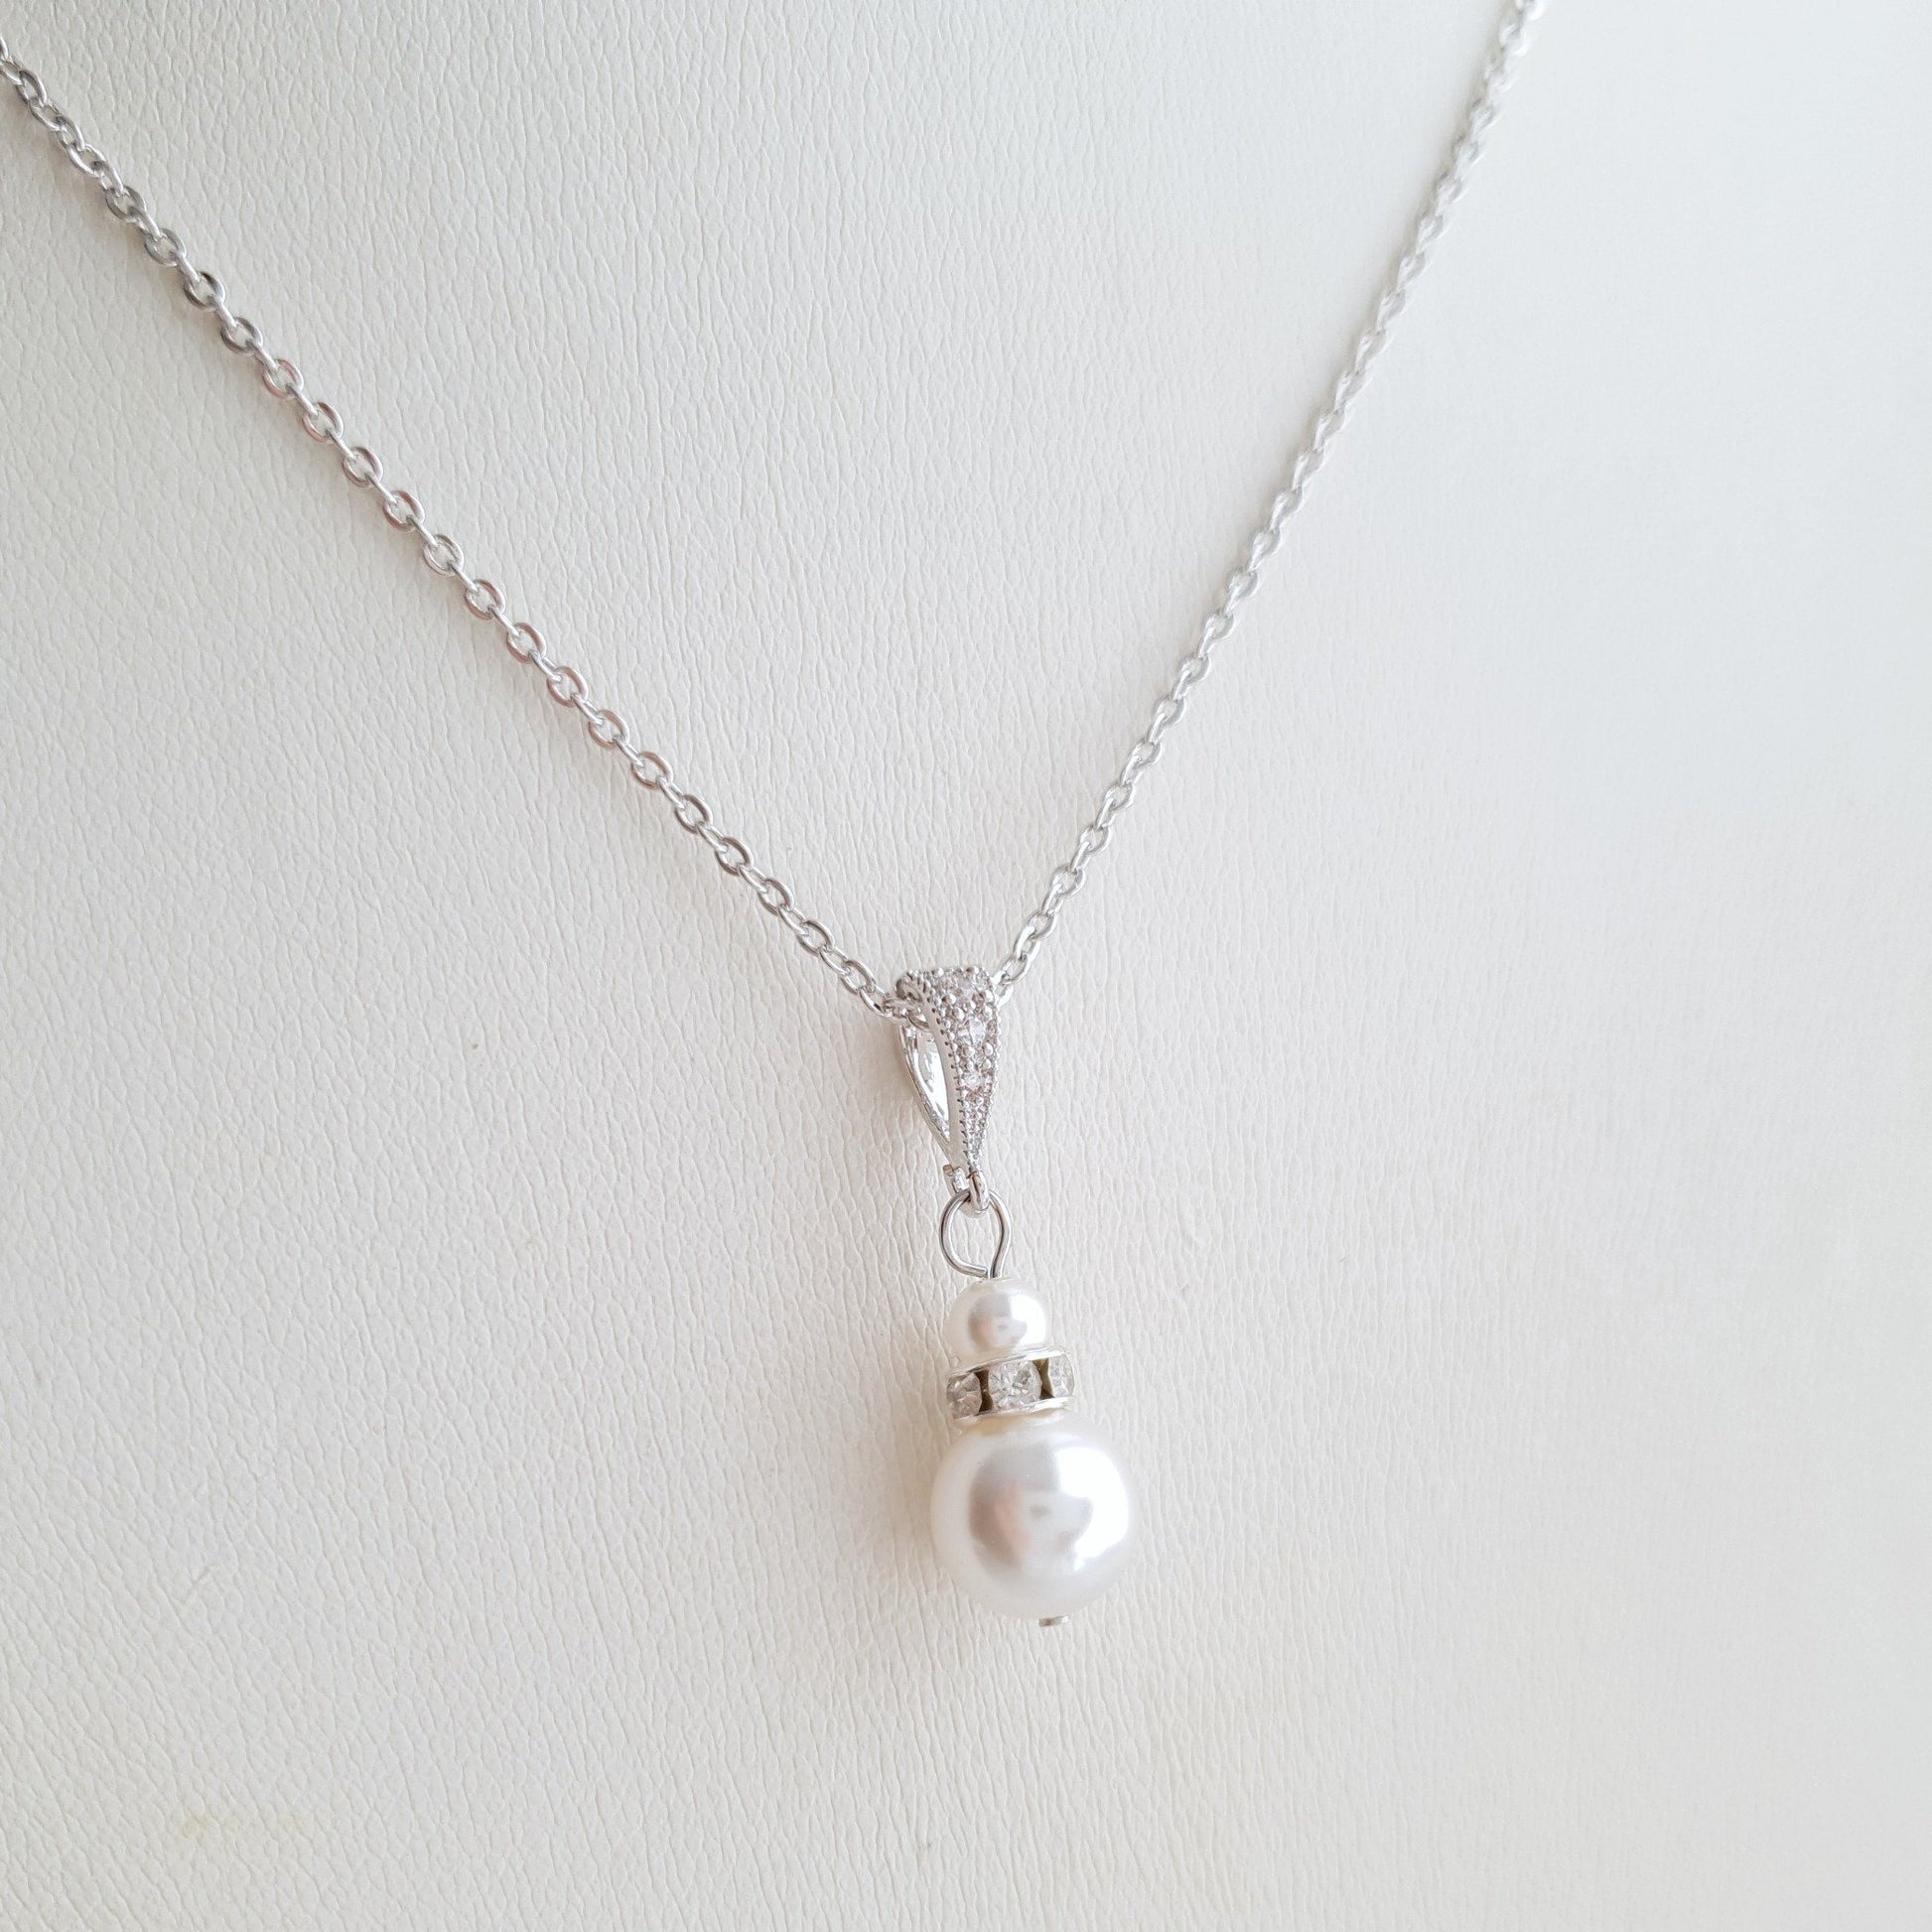 Single Pearl Pendant Necklace / 14k Rose Gold Filled / Ivory White